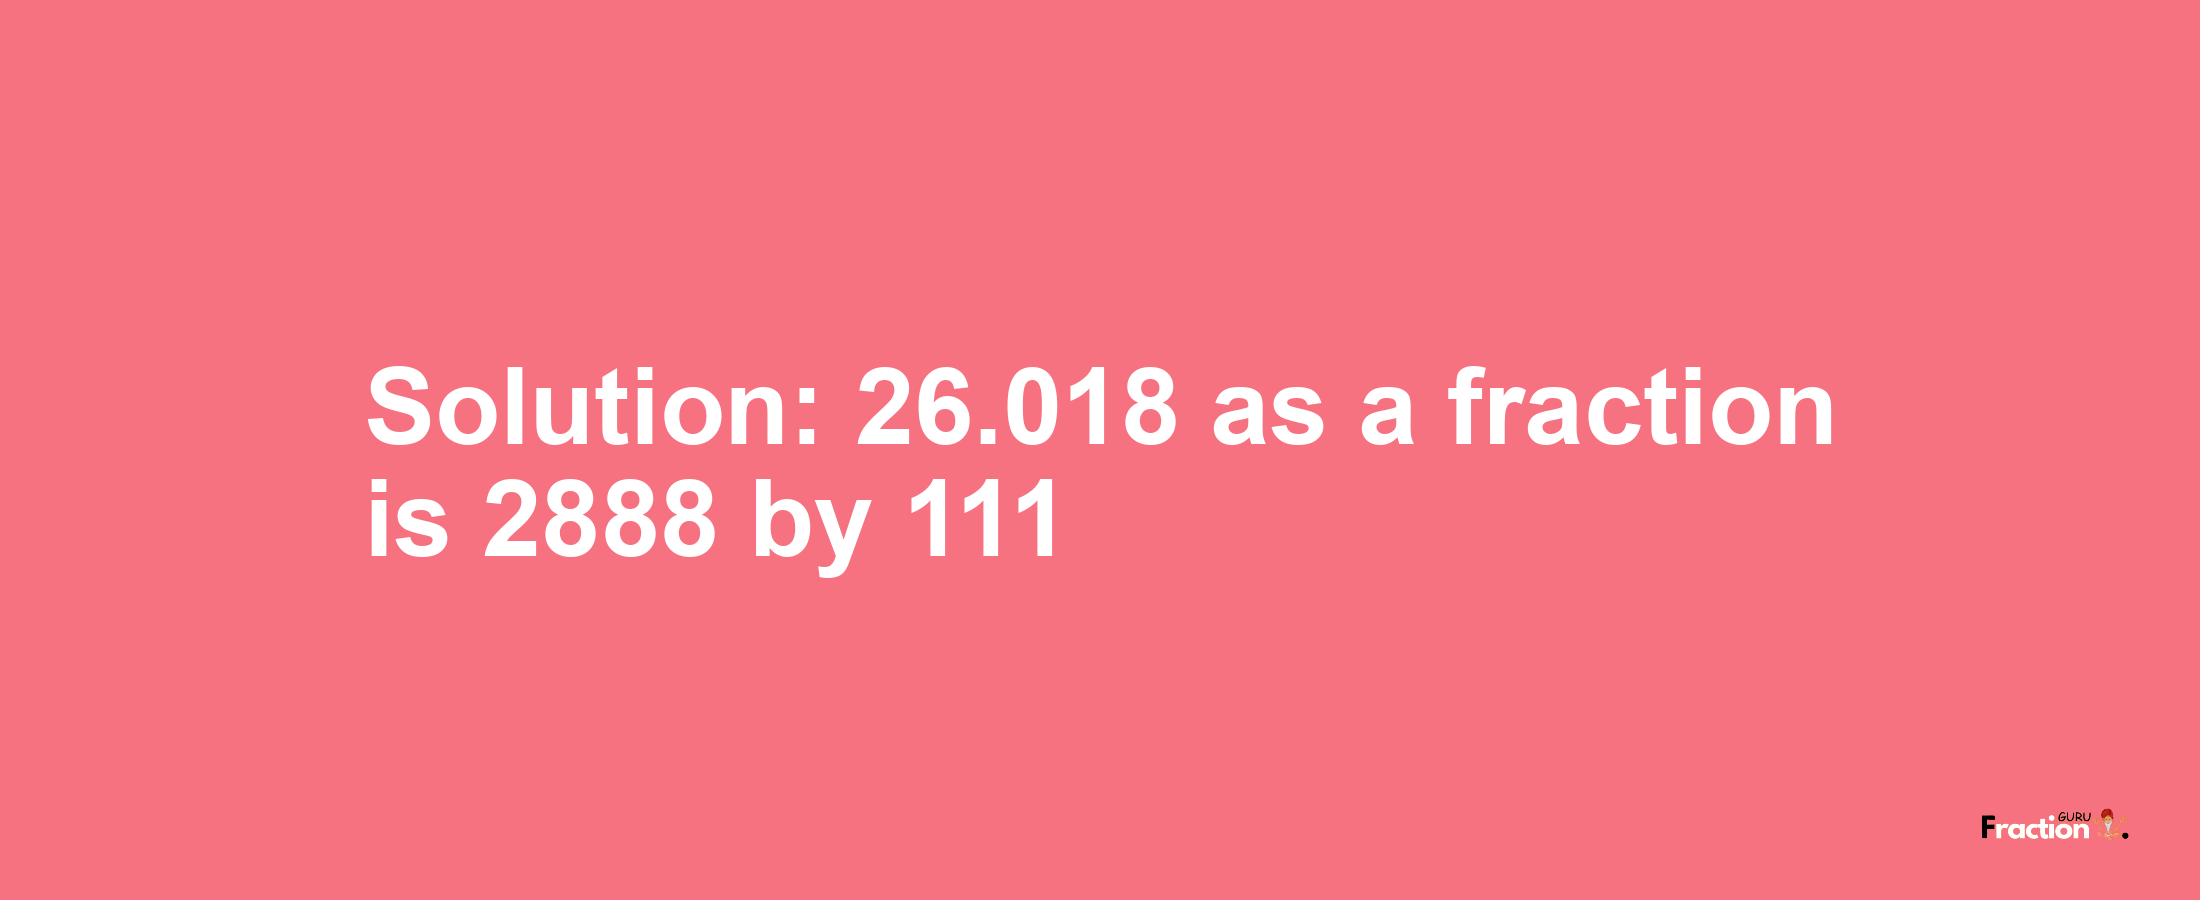 Solution:26.018 as a fraction is 2888/111